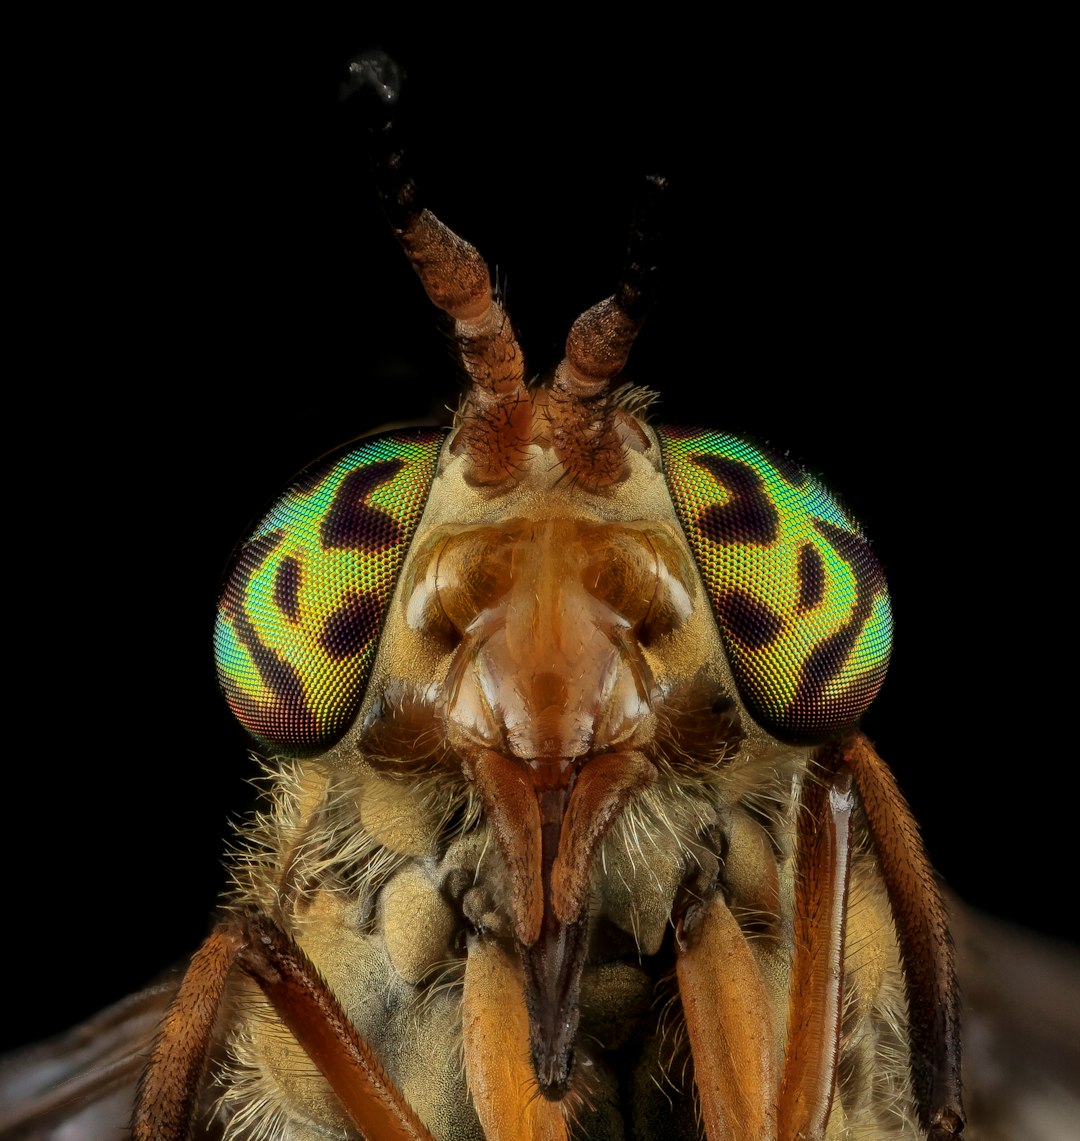 green and brown insect in close up photography